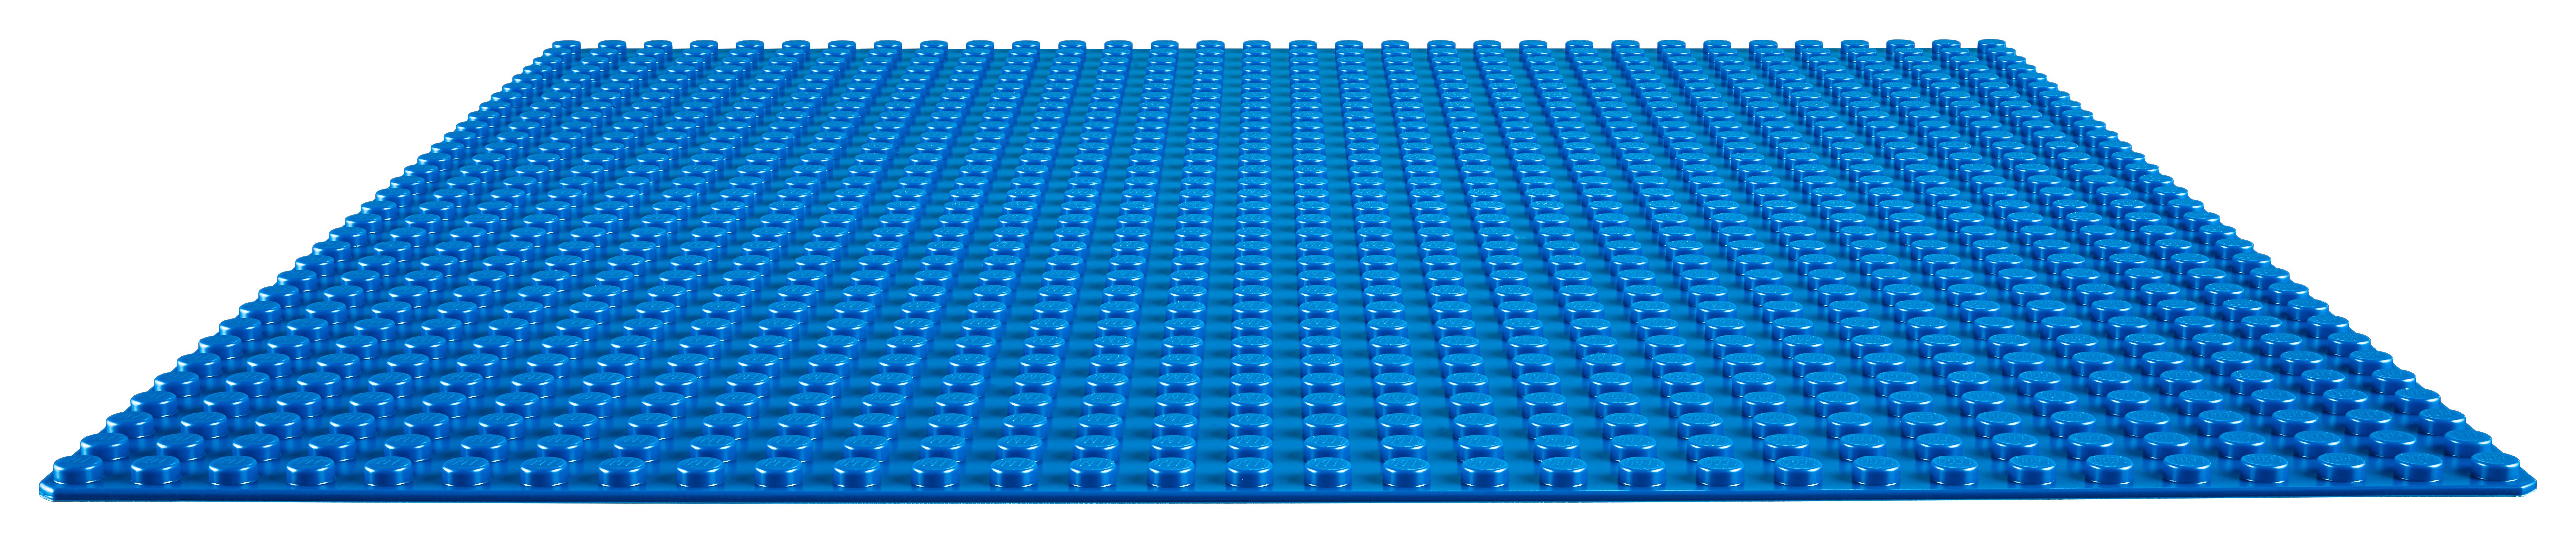 LEGO Classic Blue Baseplate 10714 Popular Toy Building Accessory - image 3 of 10